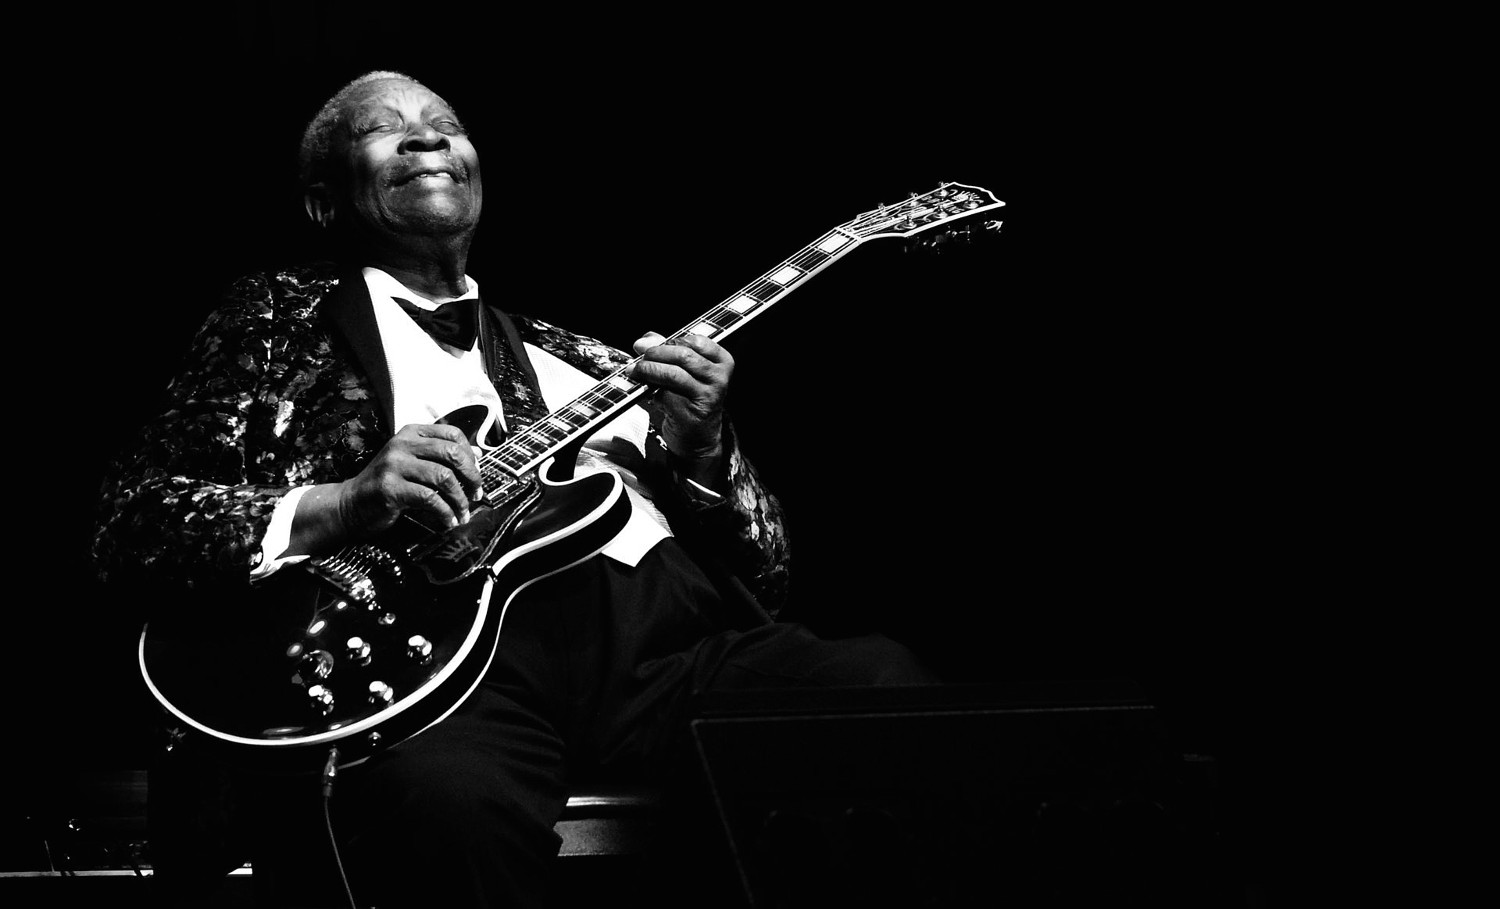 In Memoriam: A Photographic Tribute to Blues Legend BB King